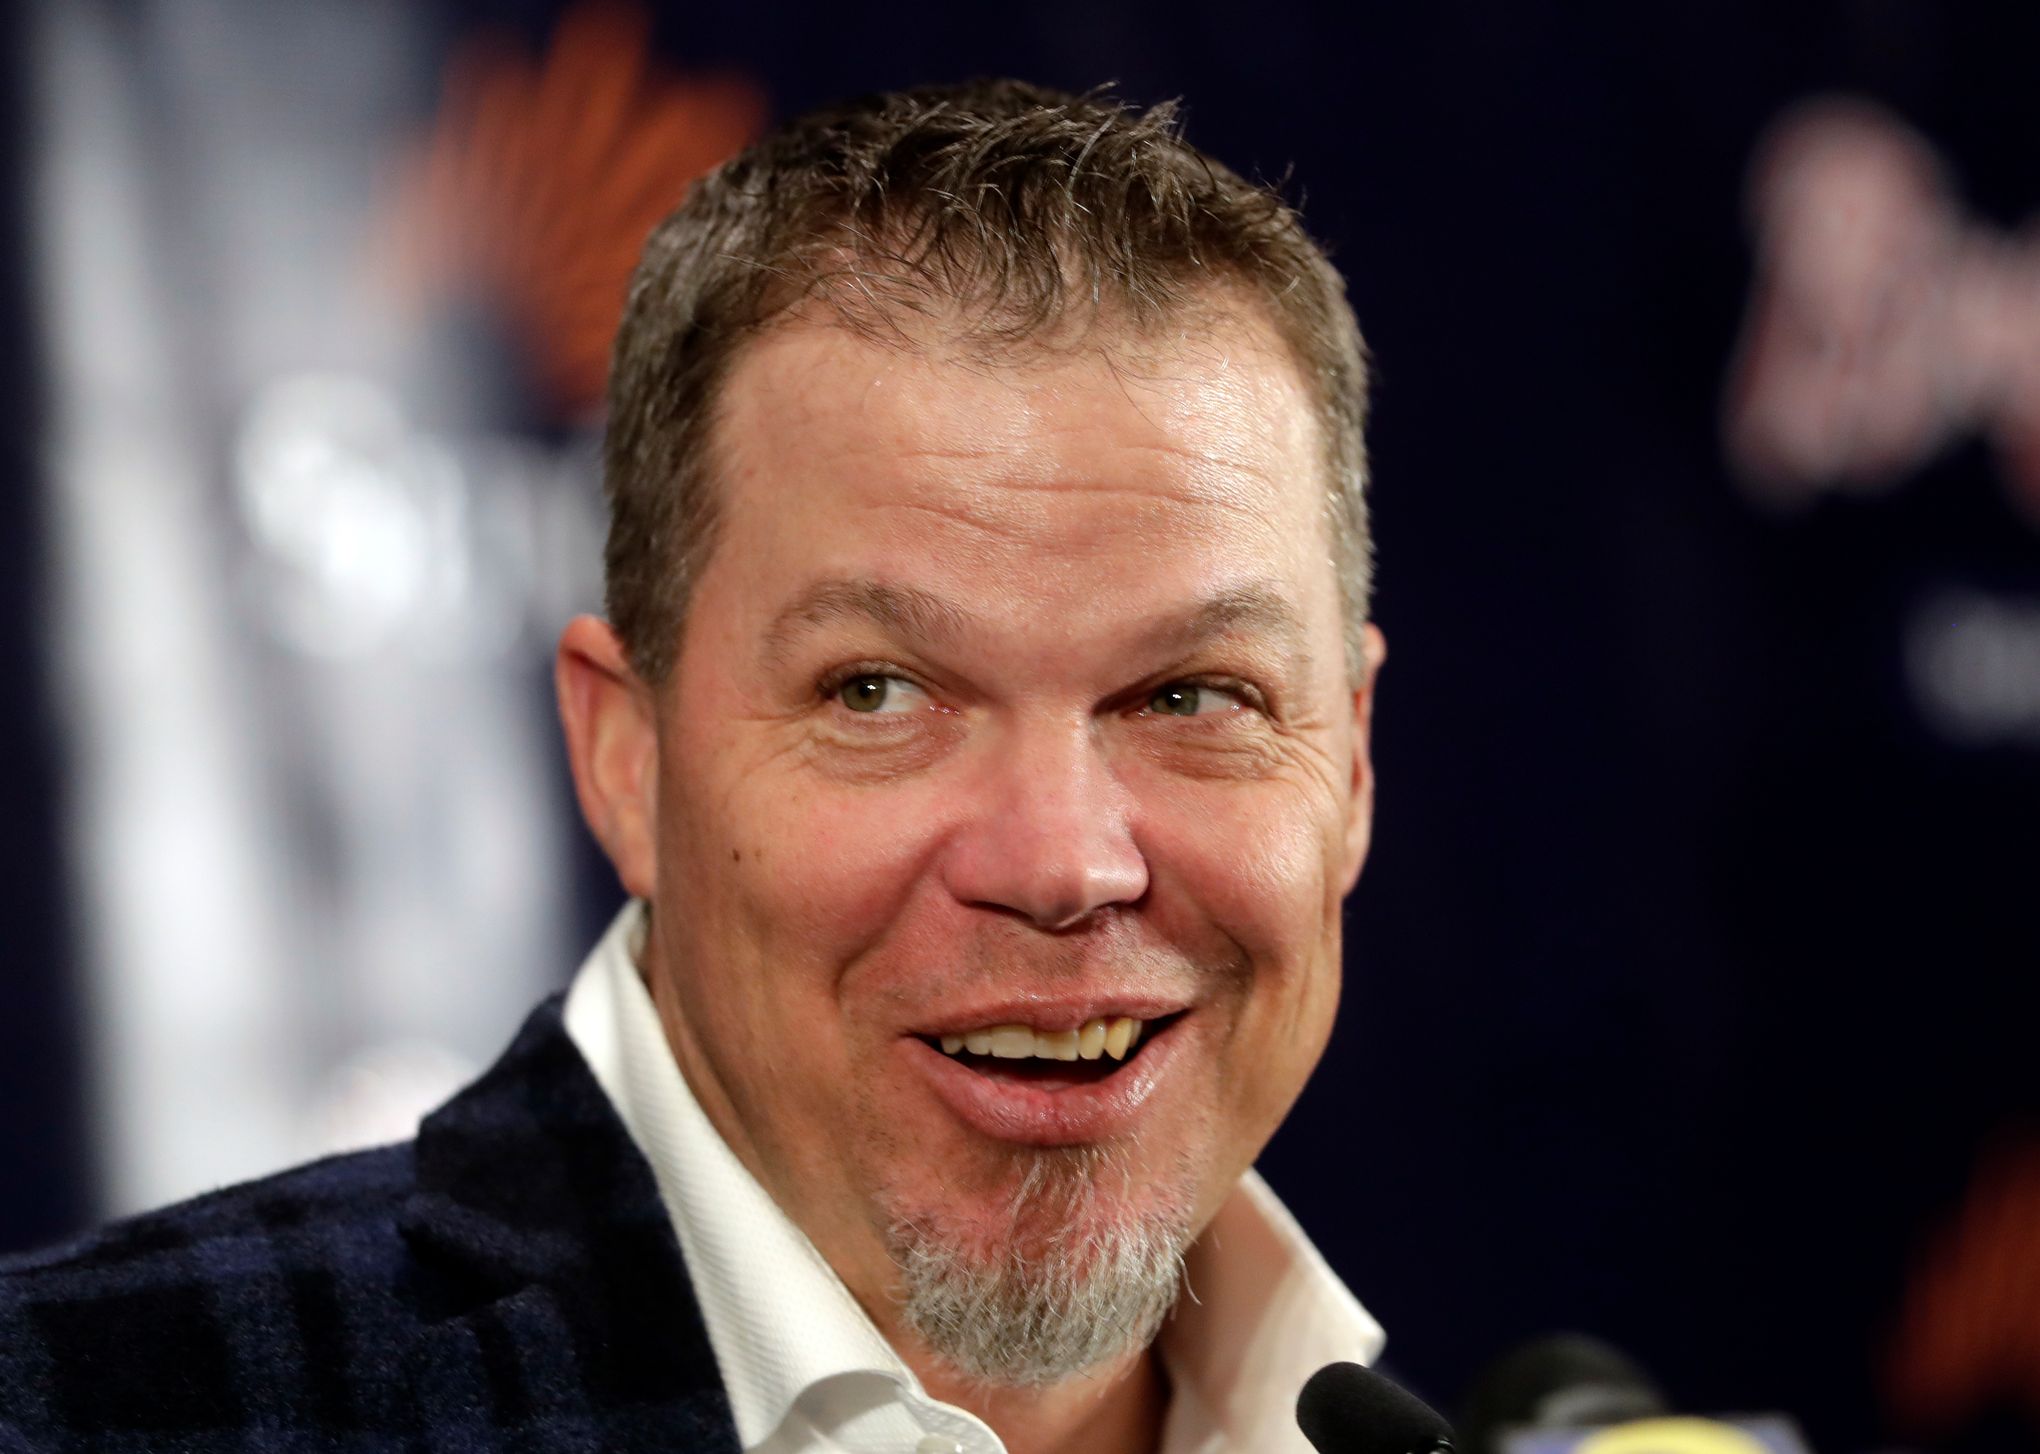 Chipper Jones follows his idol Mantle into the Hall of Fame